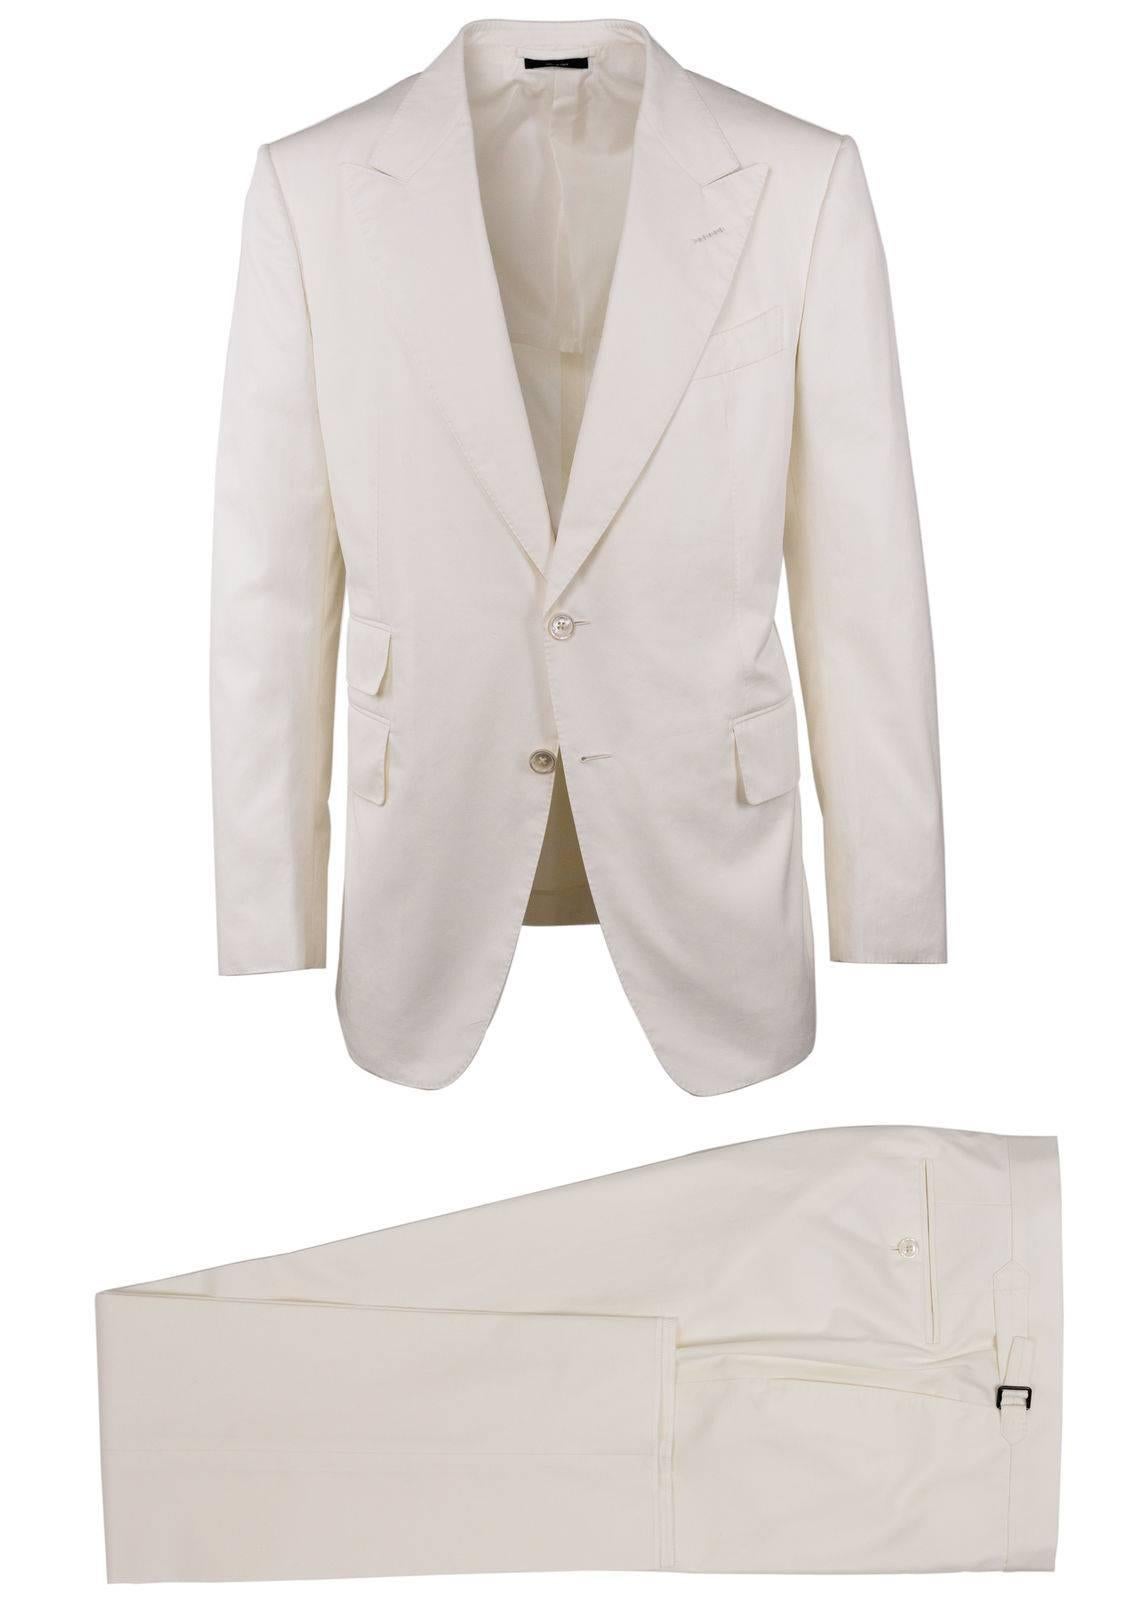 Tom Ford Men's Ivory Cotton Peak Lapel Two Piece Shelton Suit In Excellent Condition For Sale In Brooklyn, NY